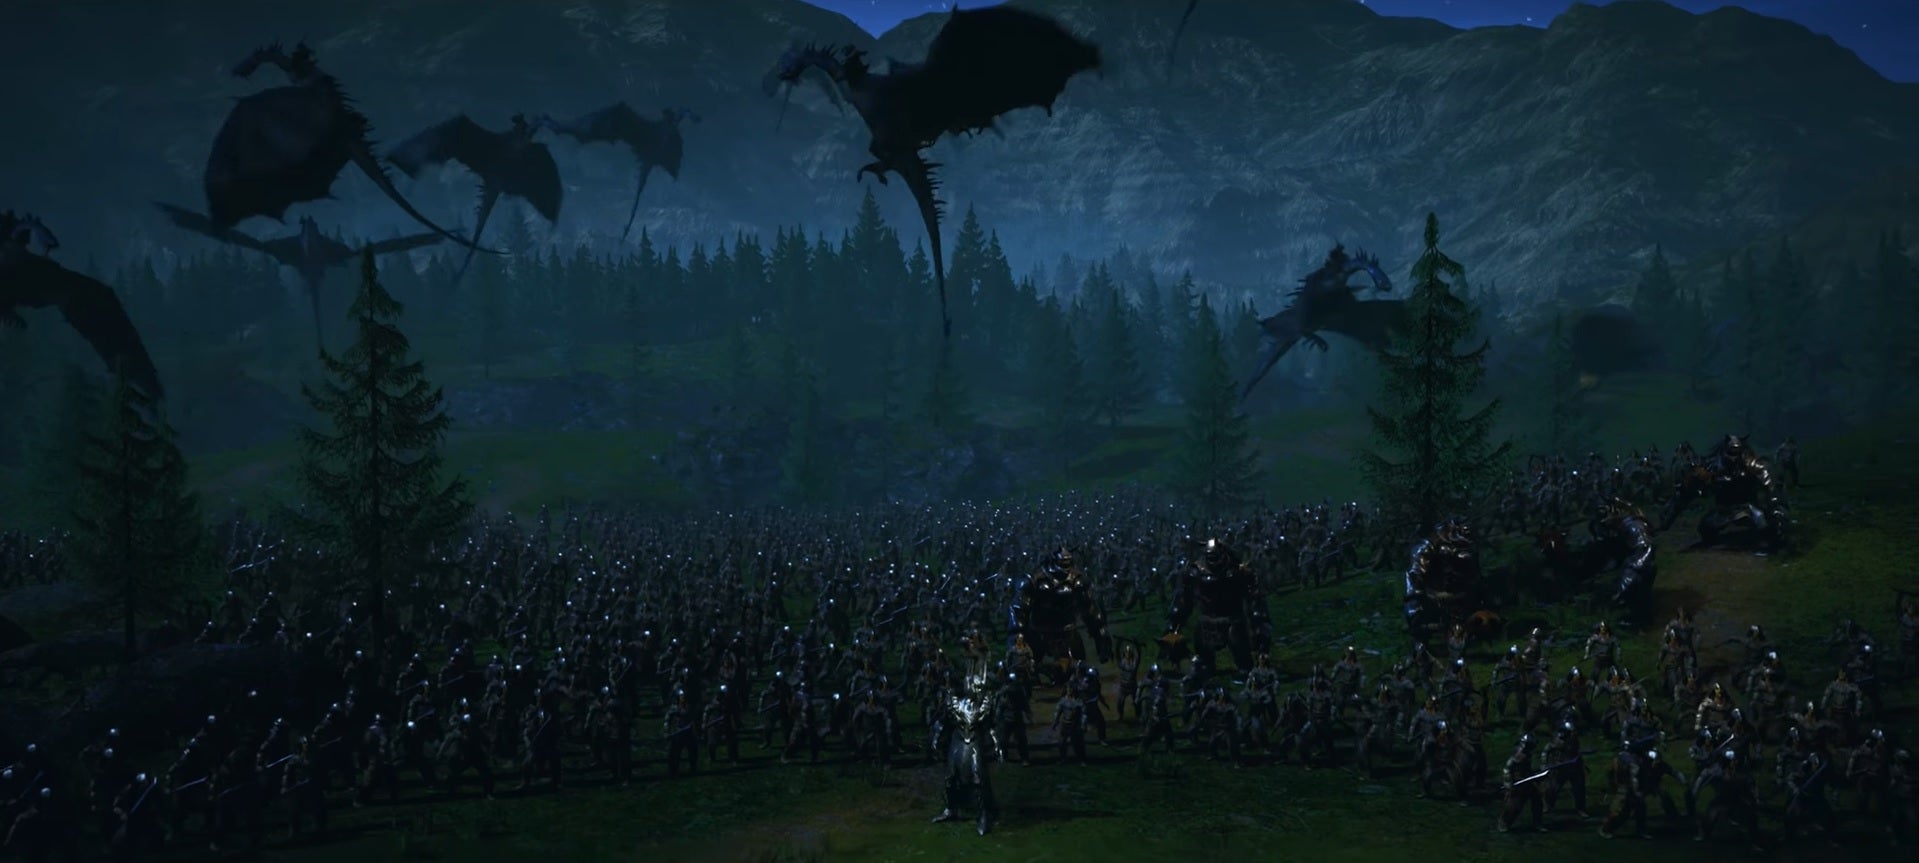 Image for Battle for Middle-earth project wants to bring game to Unreal